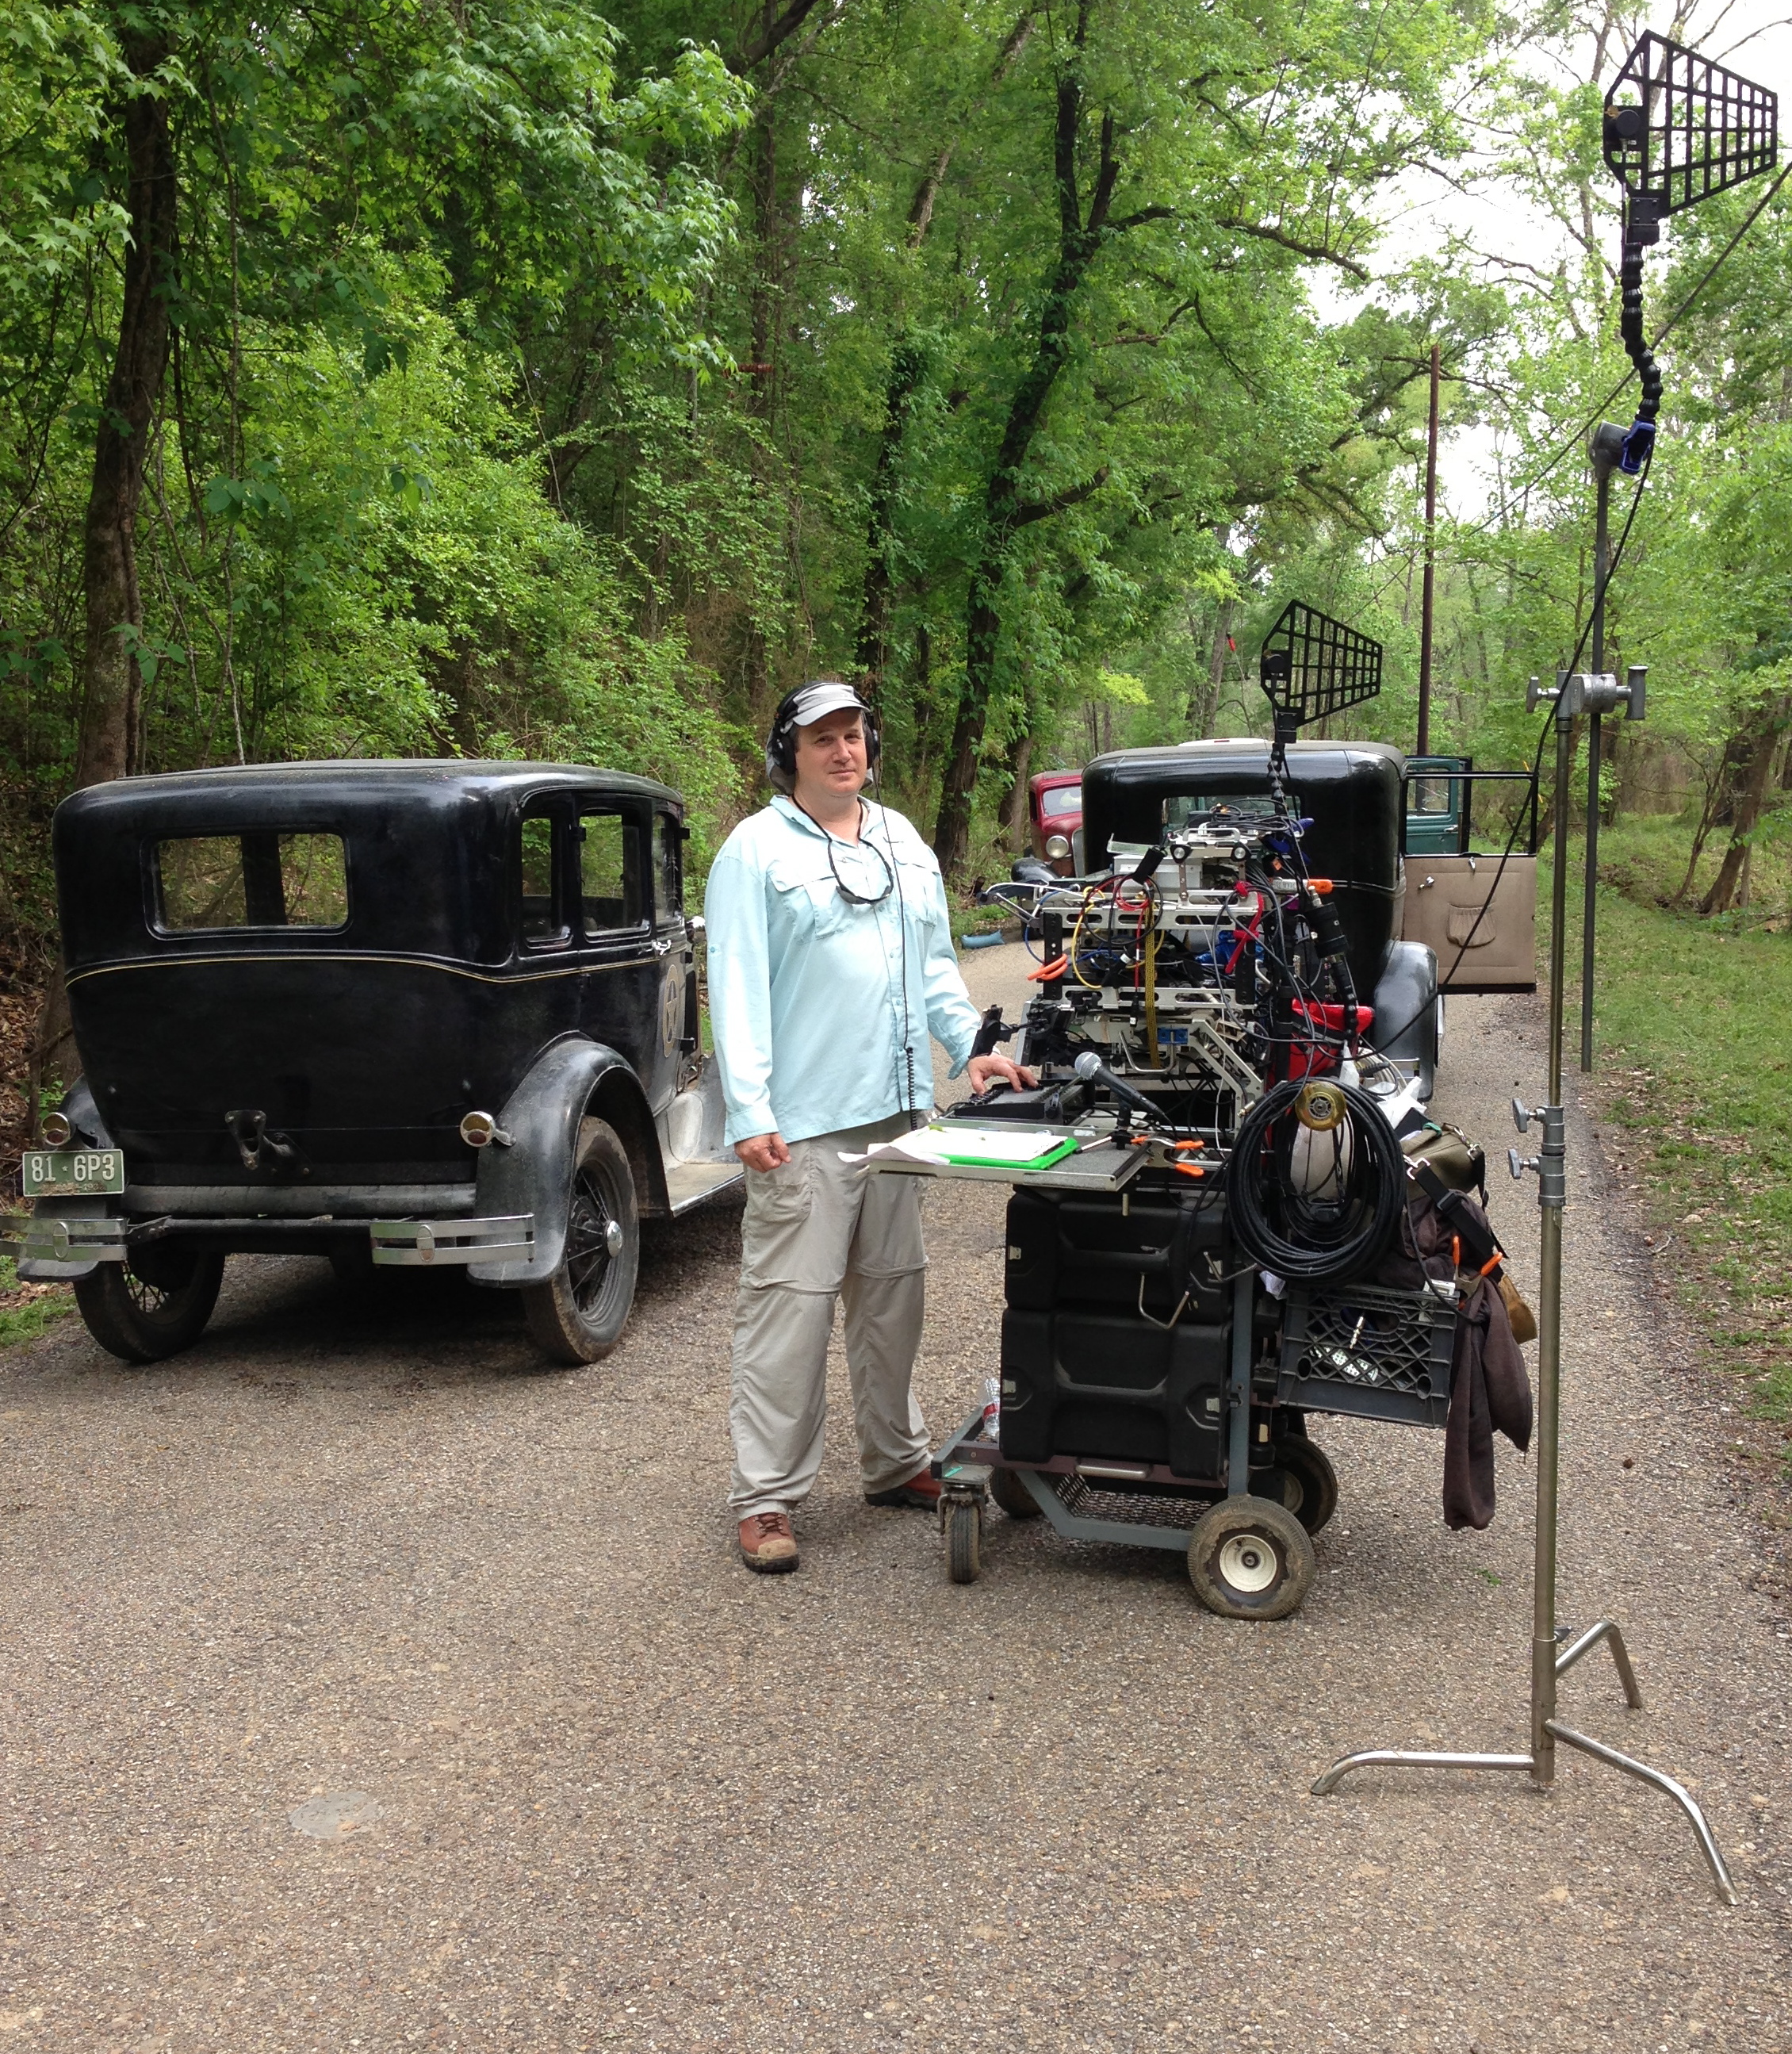 On the set of the Bonnie and Clyde mini series in the Baton Rouge area.